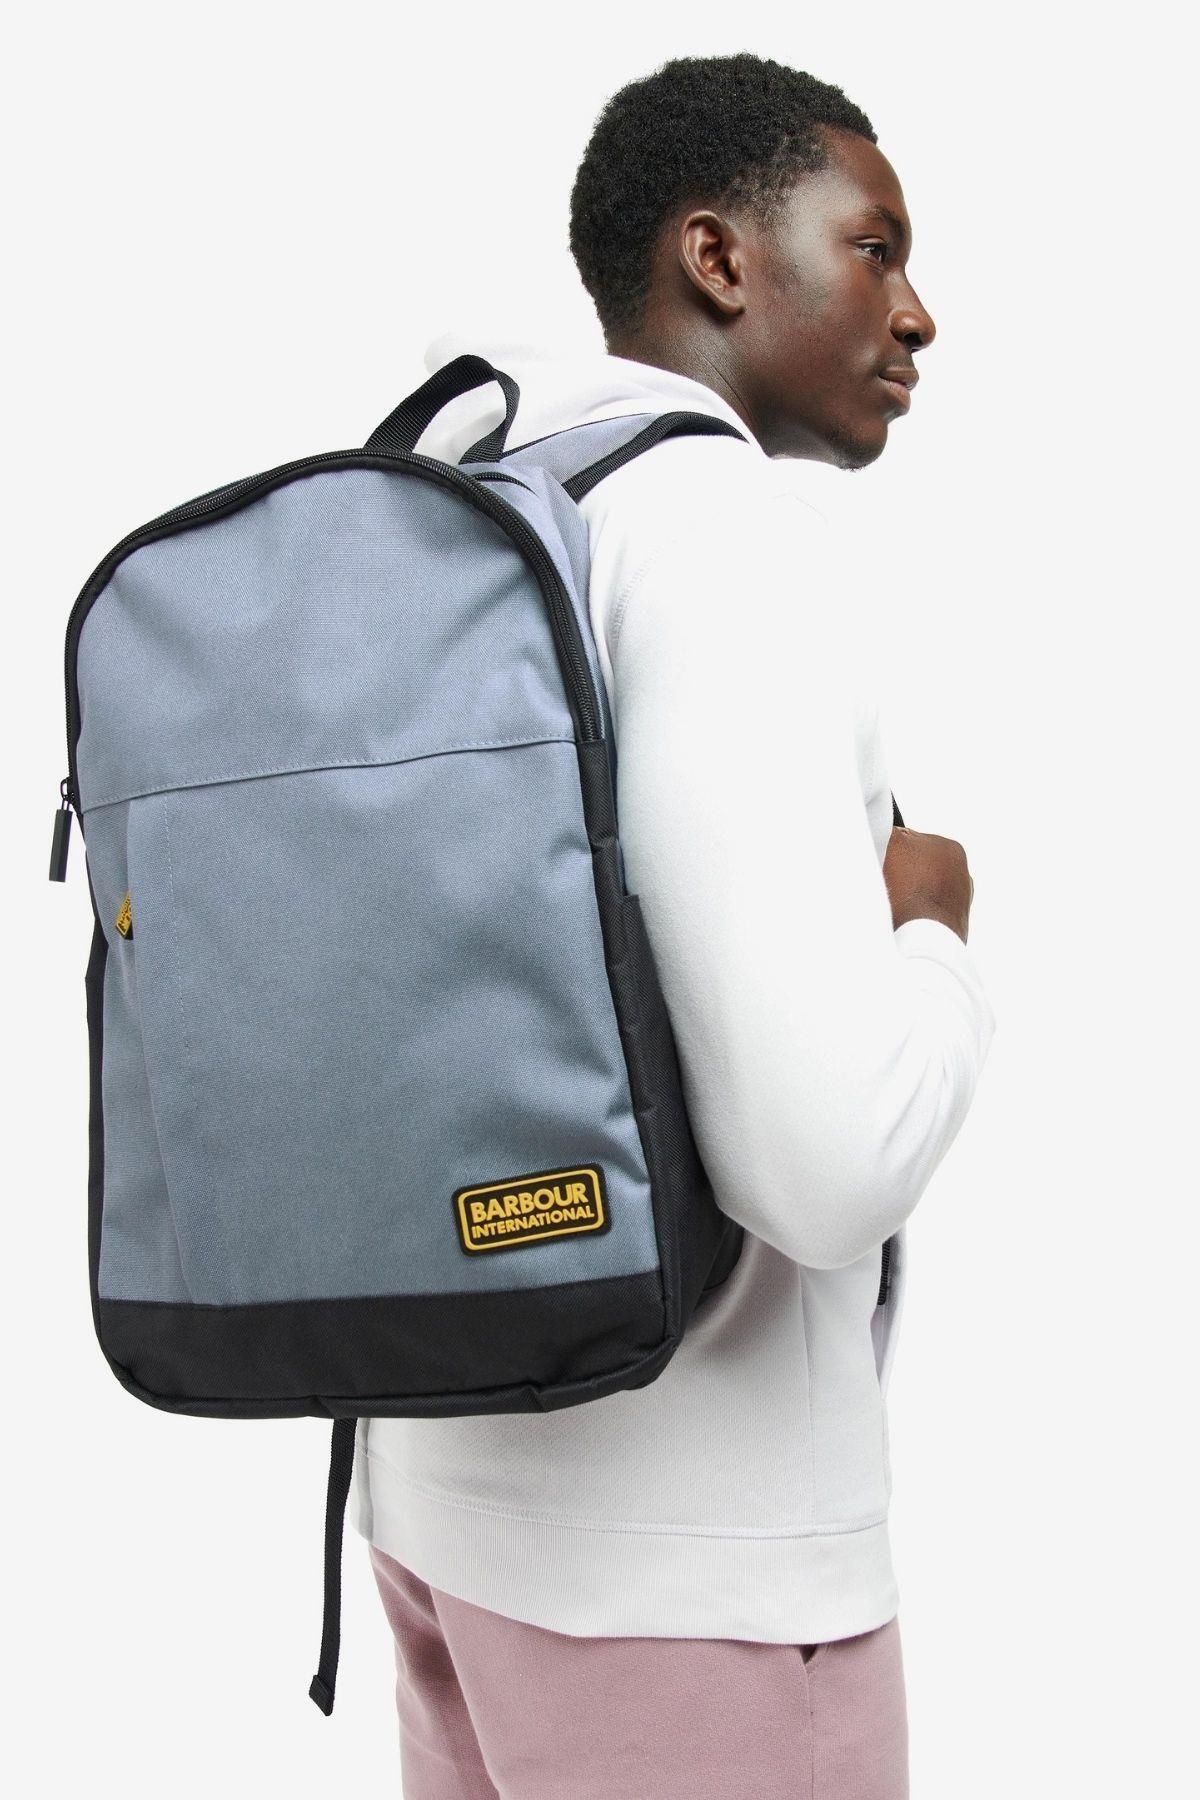 Barbour B.intl Racer Backpack Gy91 Grey